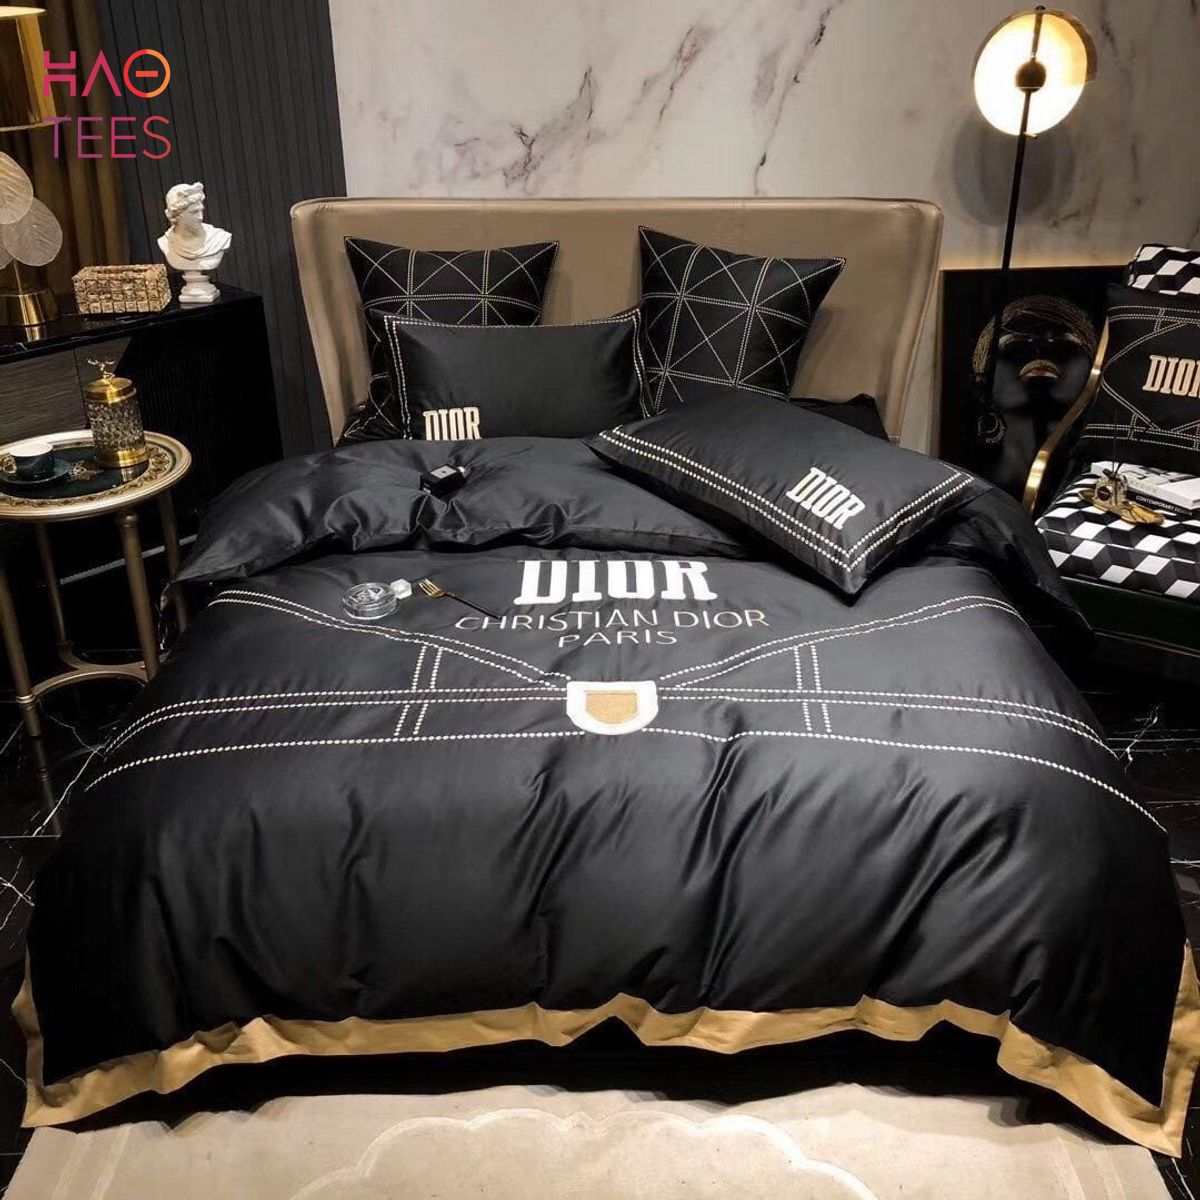 HOT Dior French Limited Edition Black Bedding Sets